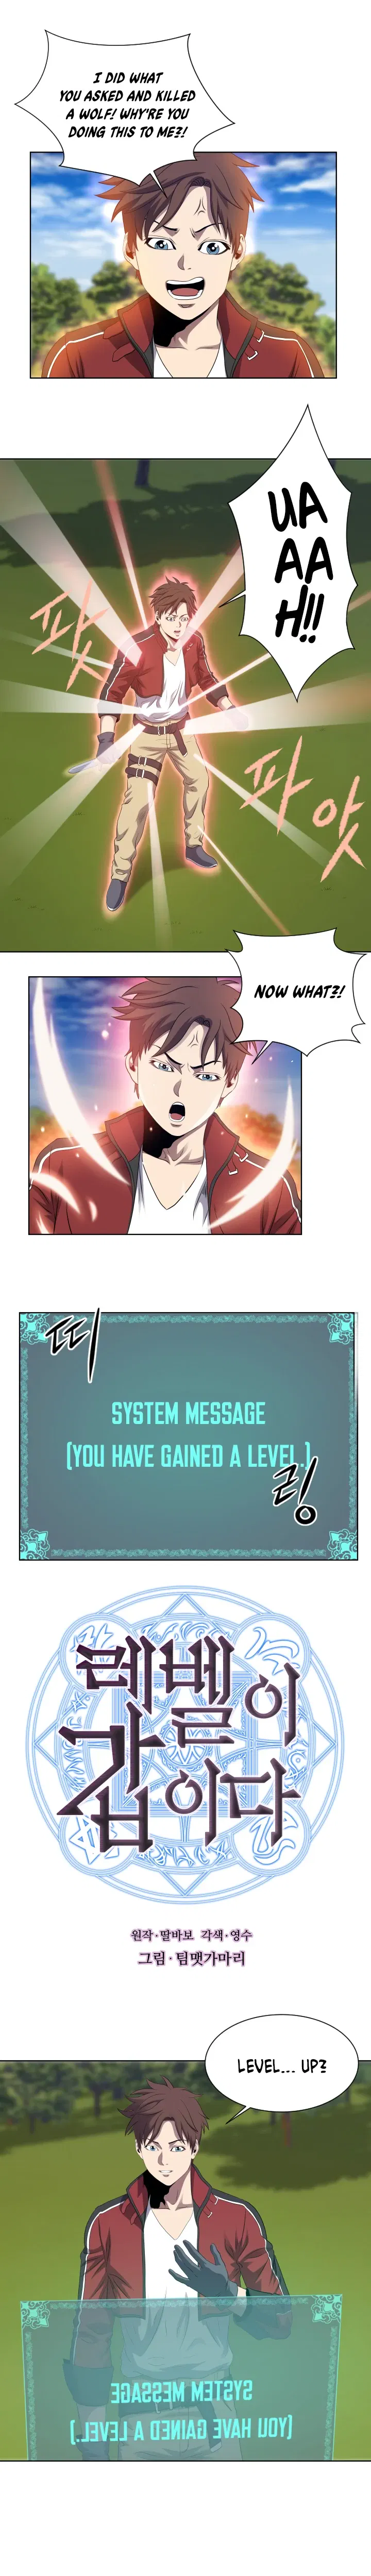 My Level's the Best Chapter 7 page 2